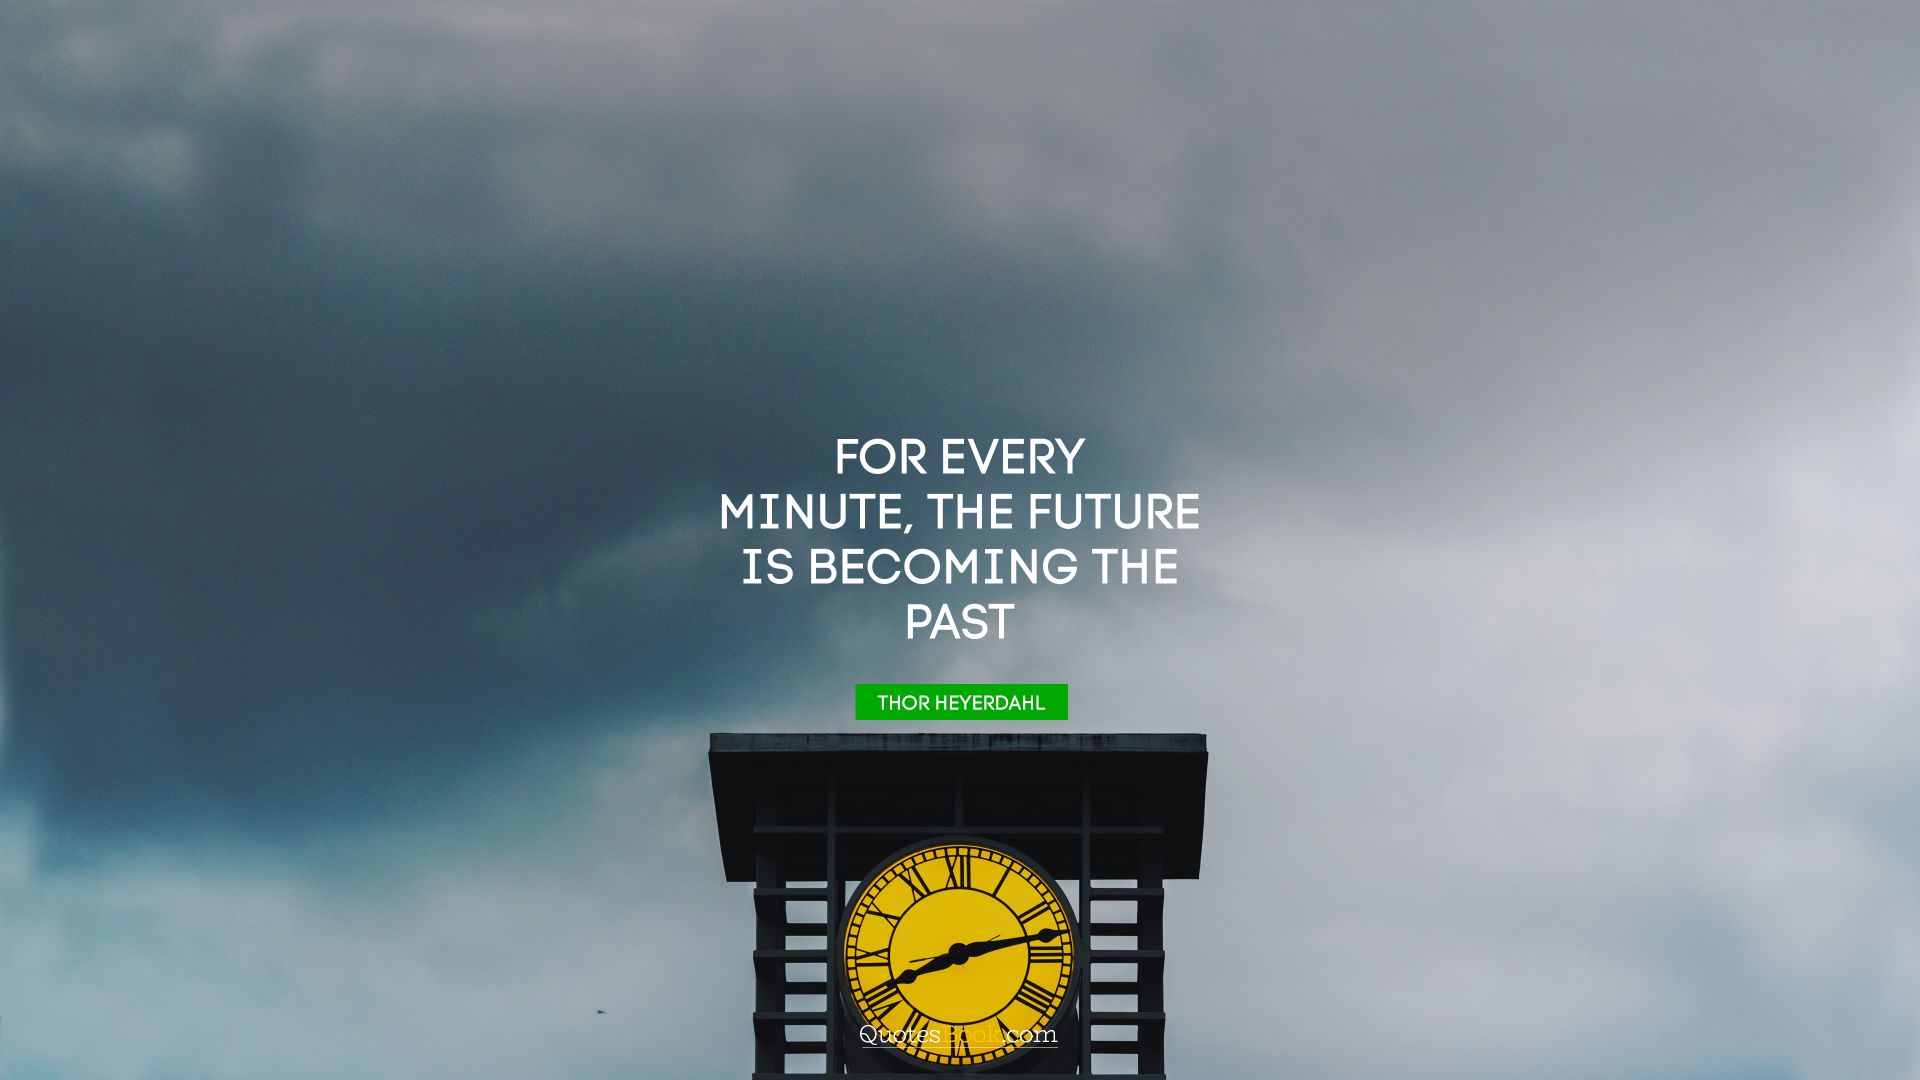 For every minute, the future is becoming the past. - Quote by Thor Heyerdahl